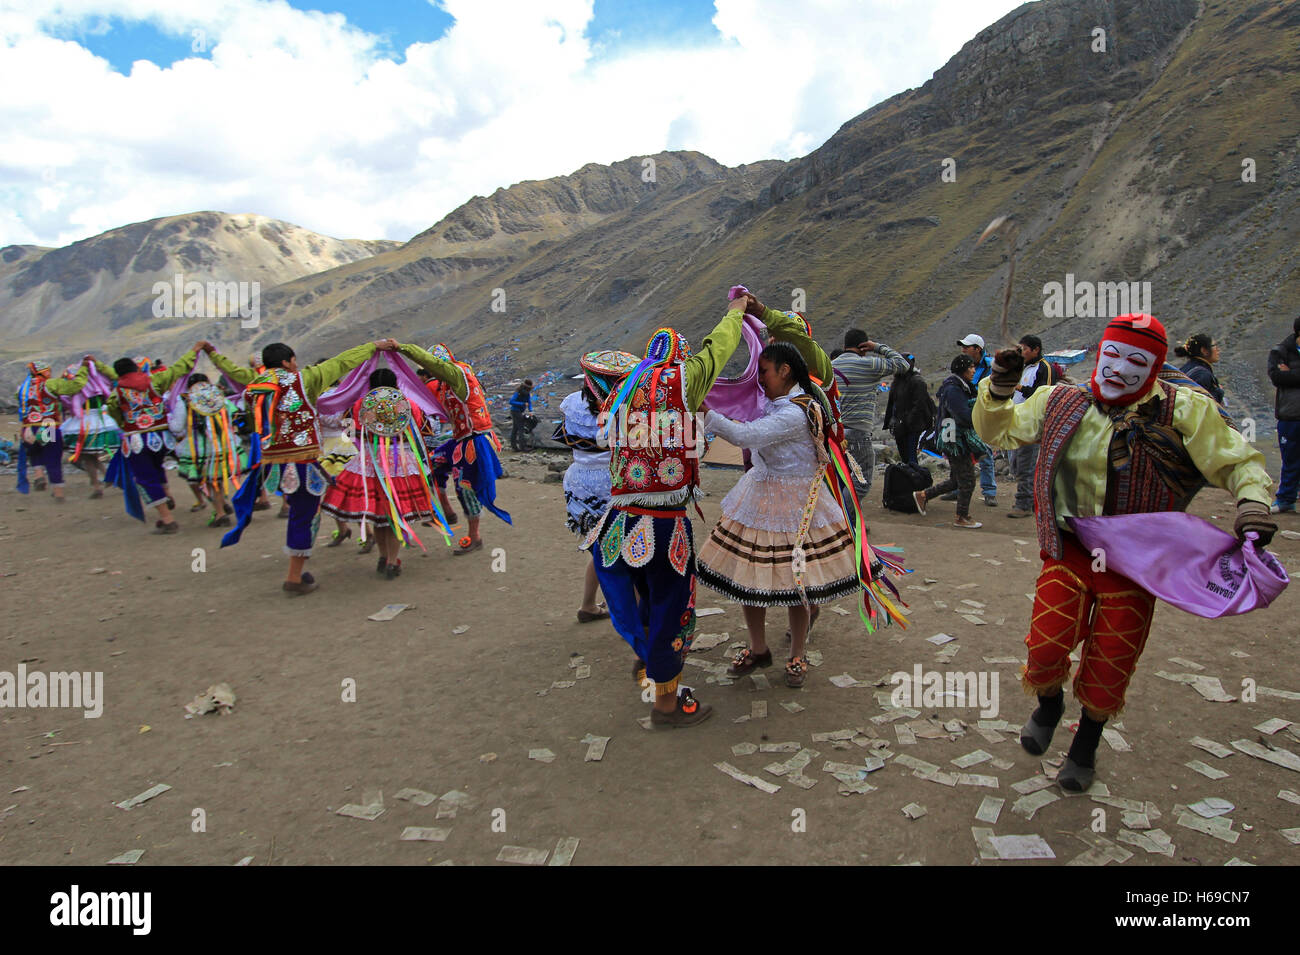 Dancers at Quyllurit'i inca festival in the peruvian andes near ausangate mountain. Stock Photo